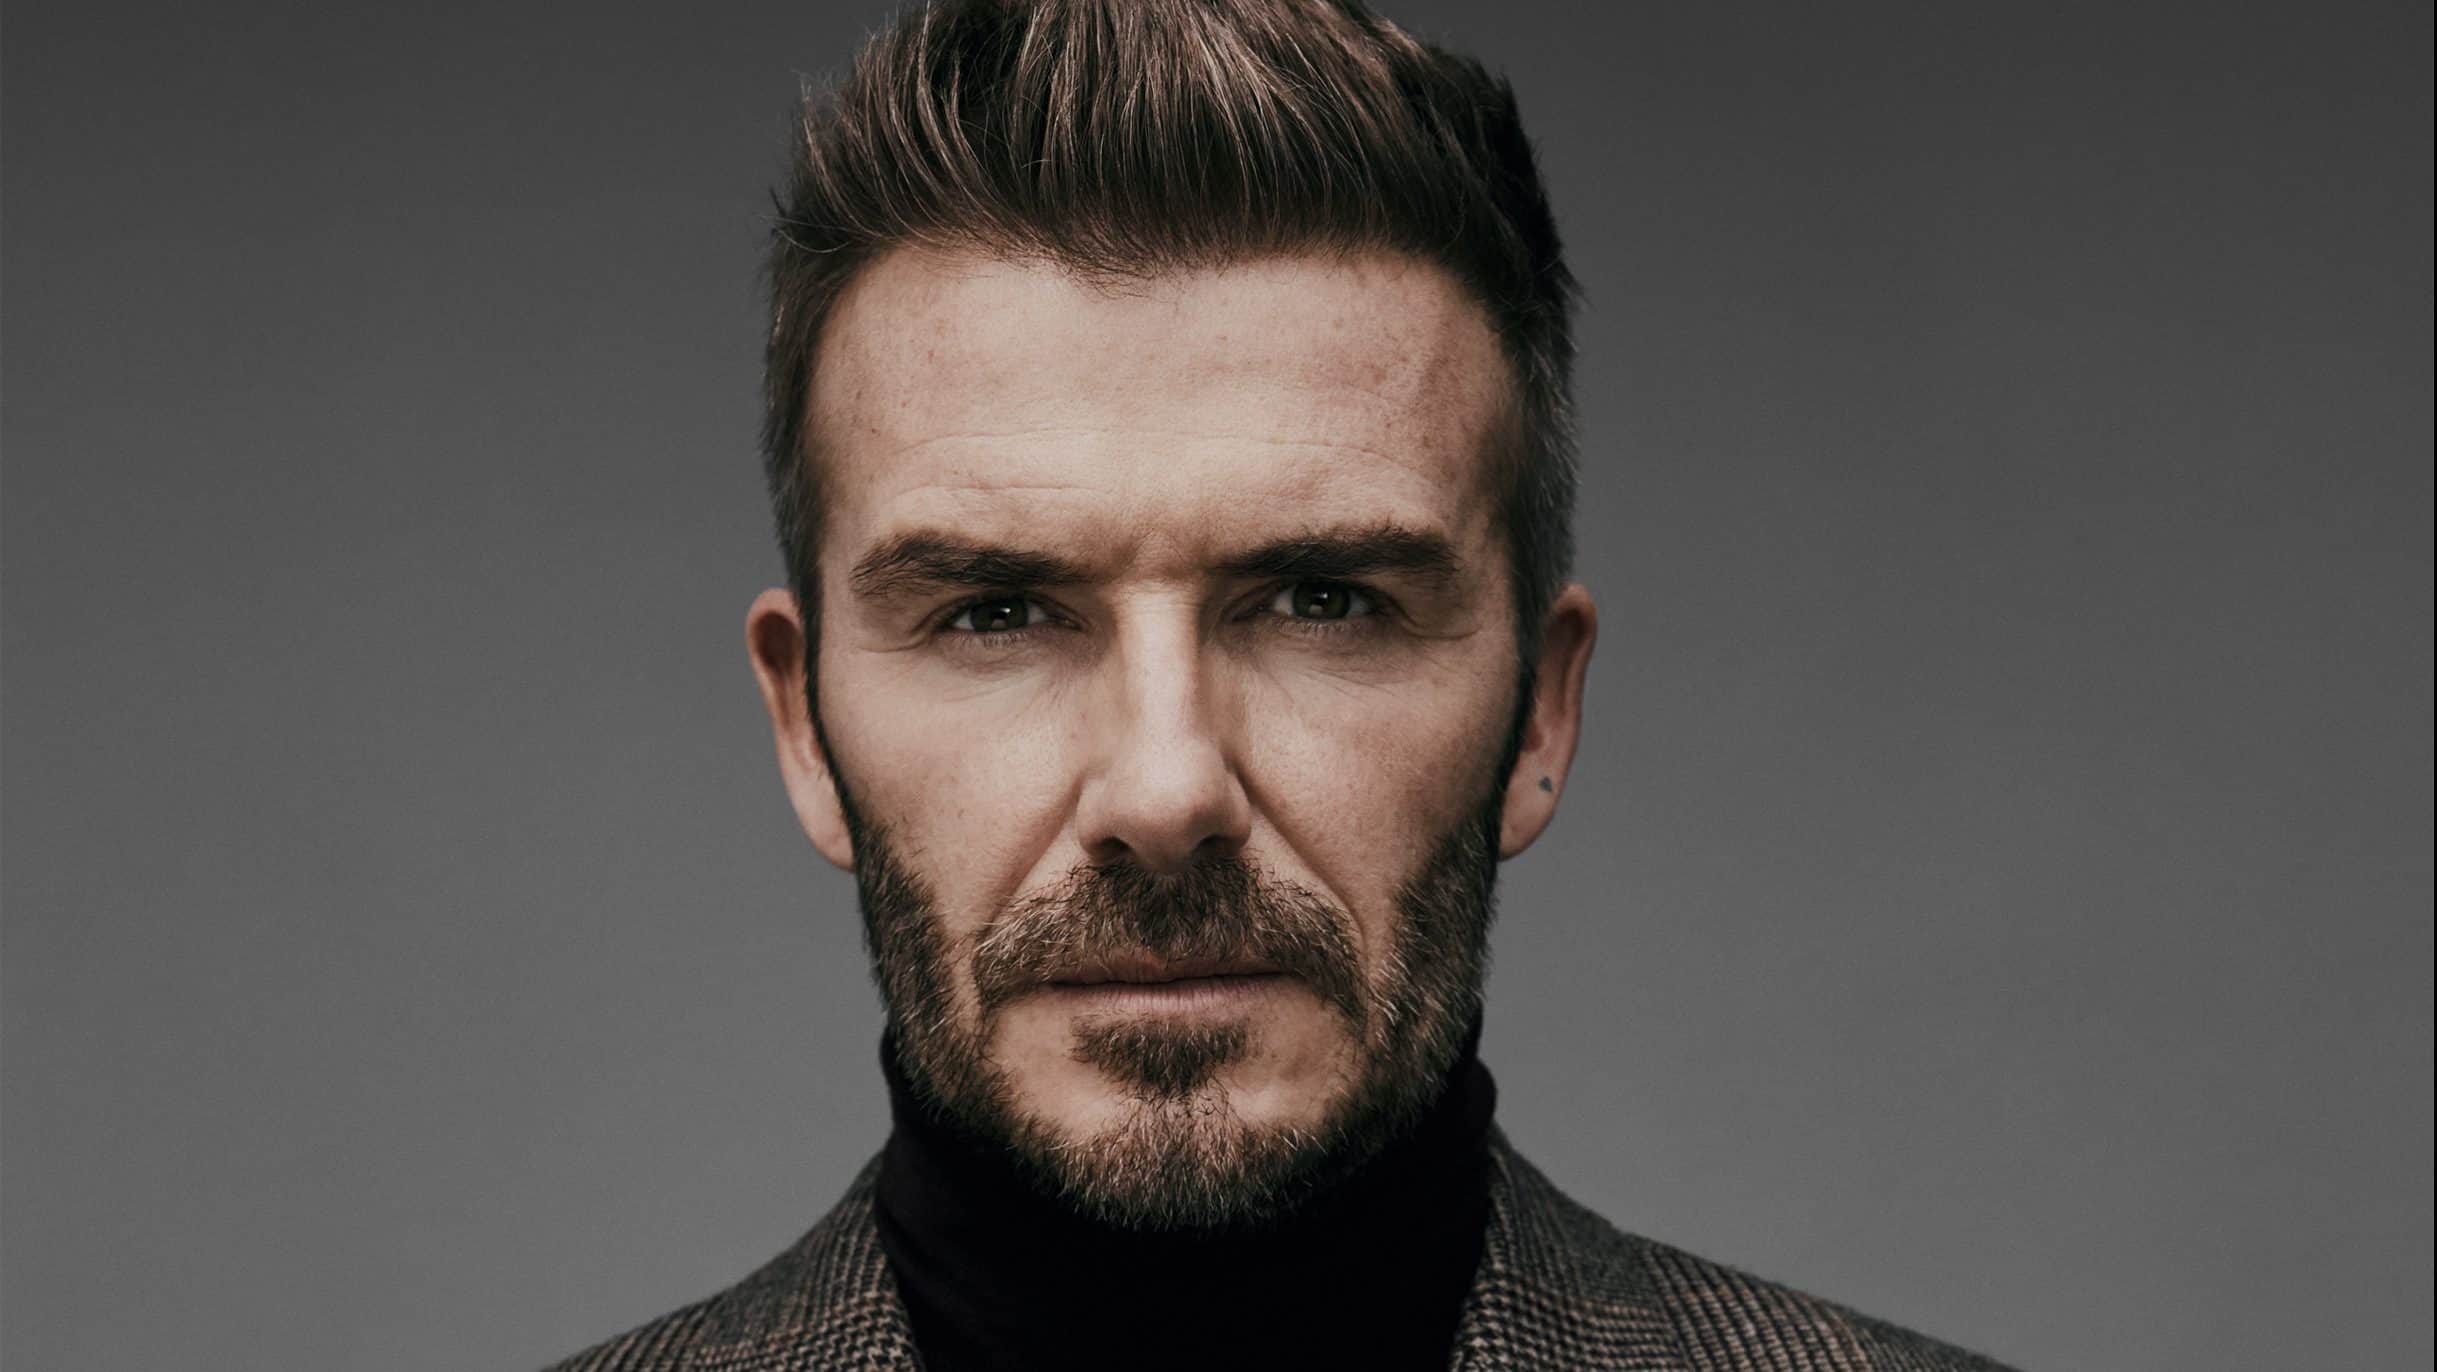 TrendMantra David-Beckham1-e1618304293407 31 Hottest Men Who Always Rule The Hearts & Search Results Of Women 